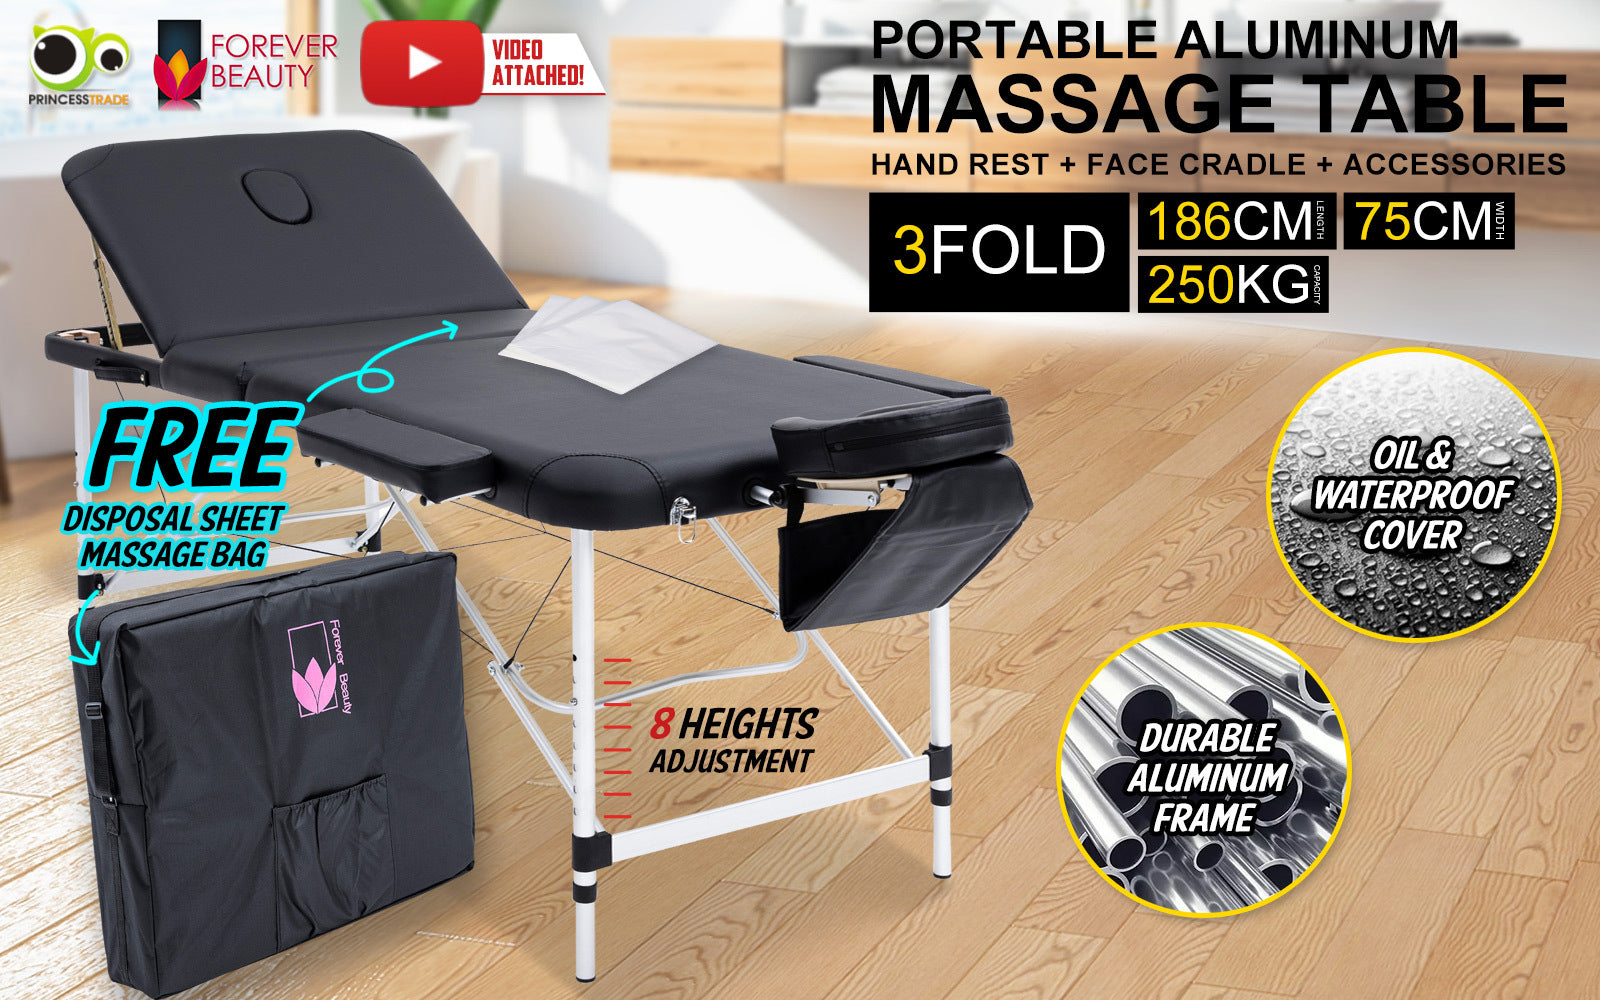 Forever Beauty Black Portable Beauty Massage Table Bed Therapy Waxing 3 Fold 75cm Aluminium